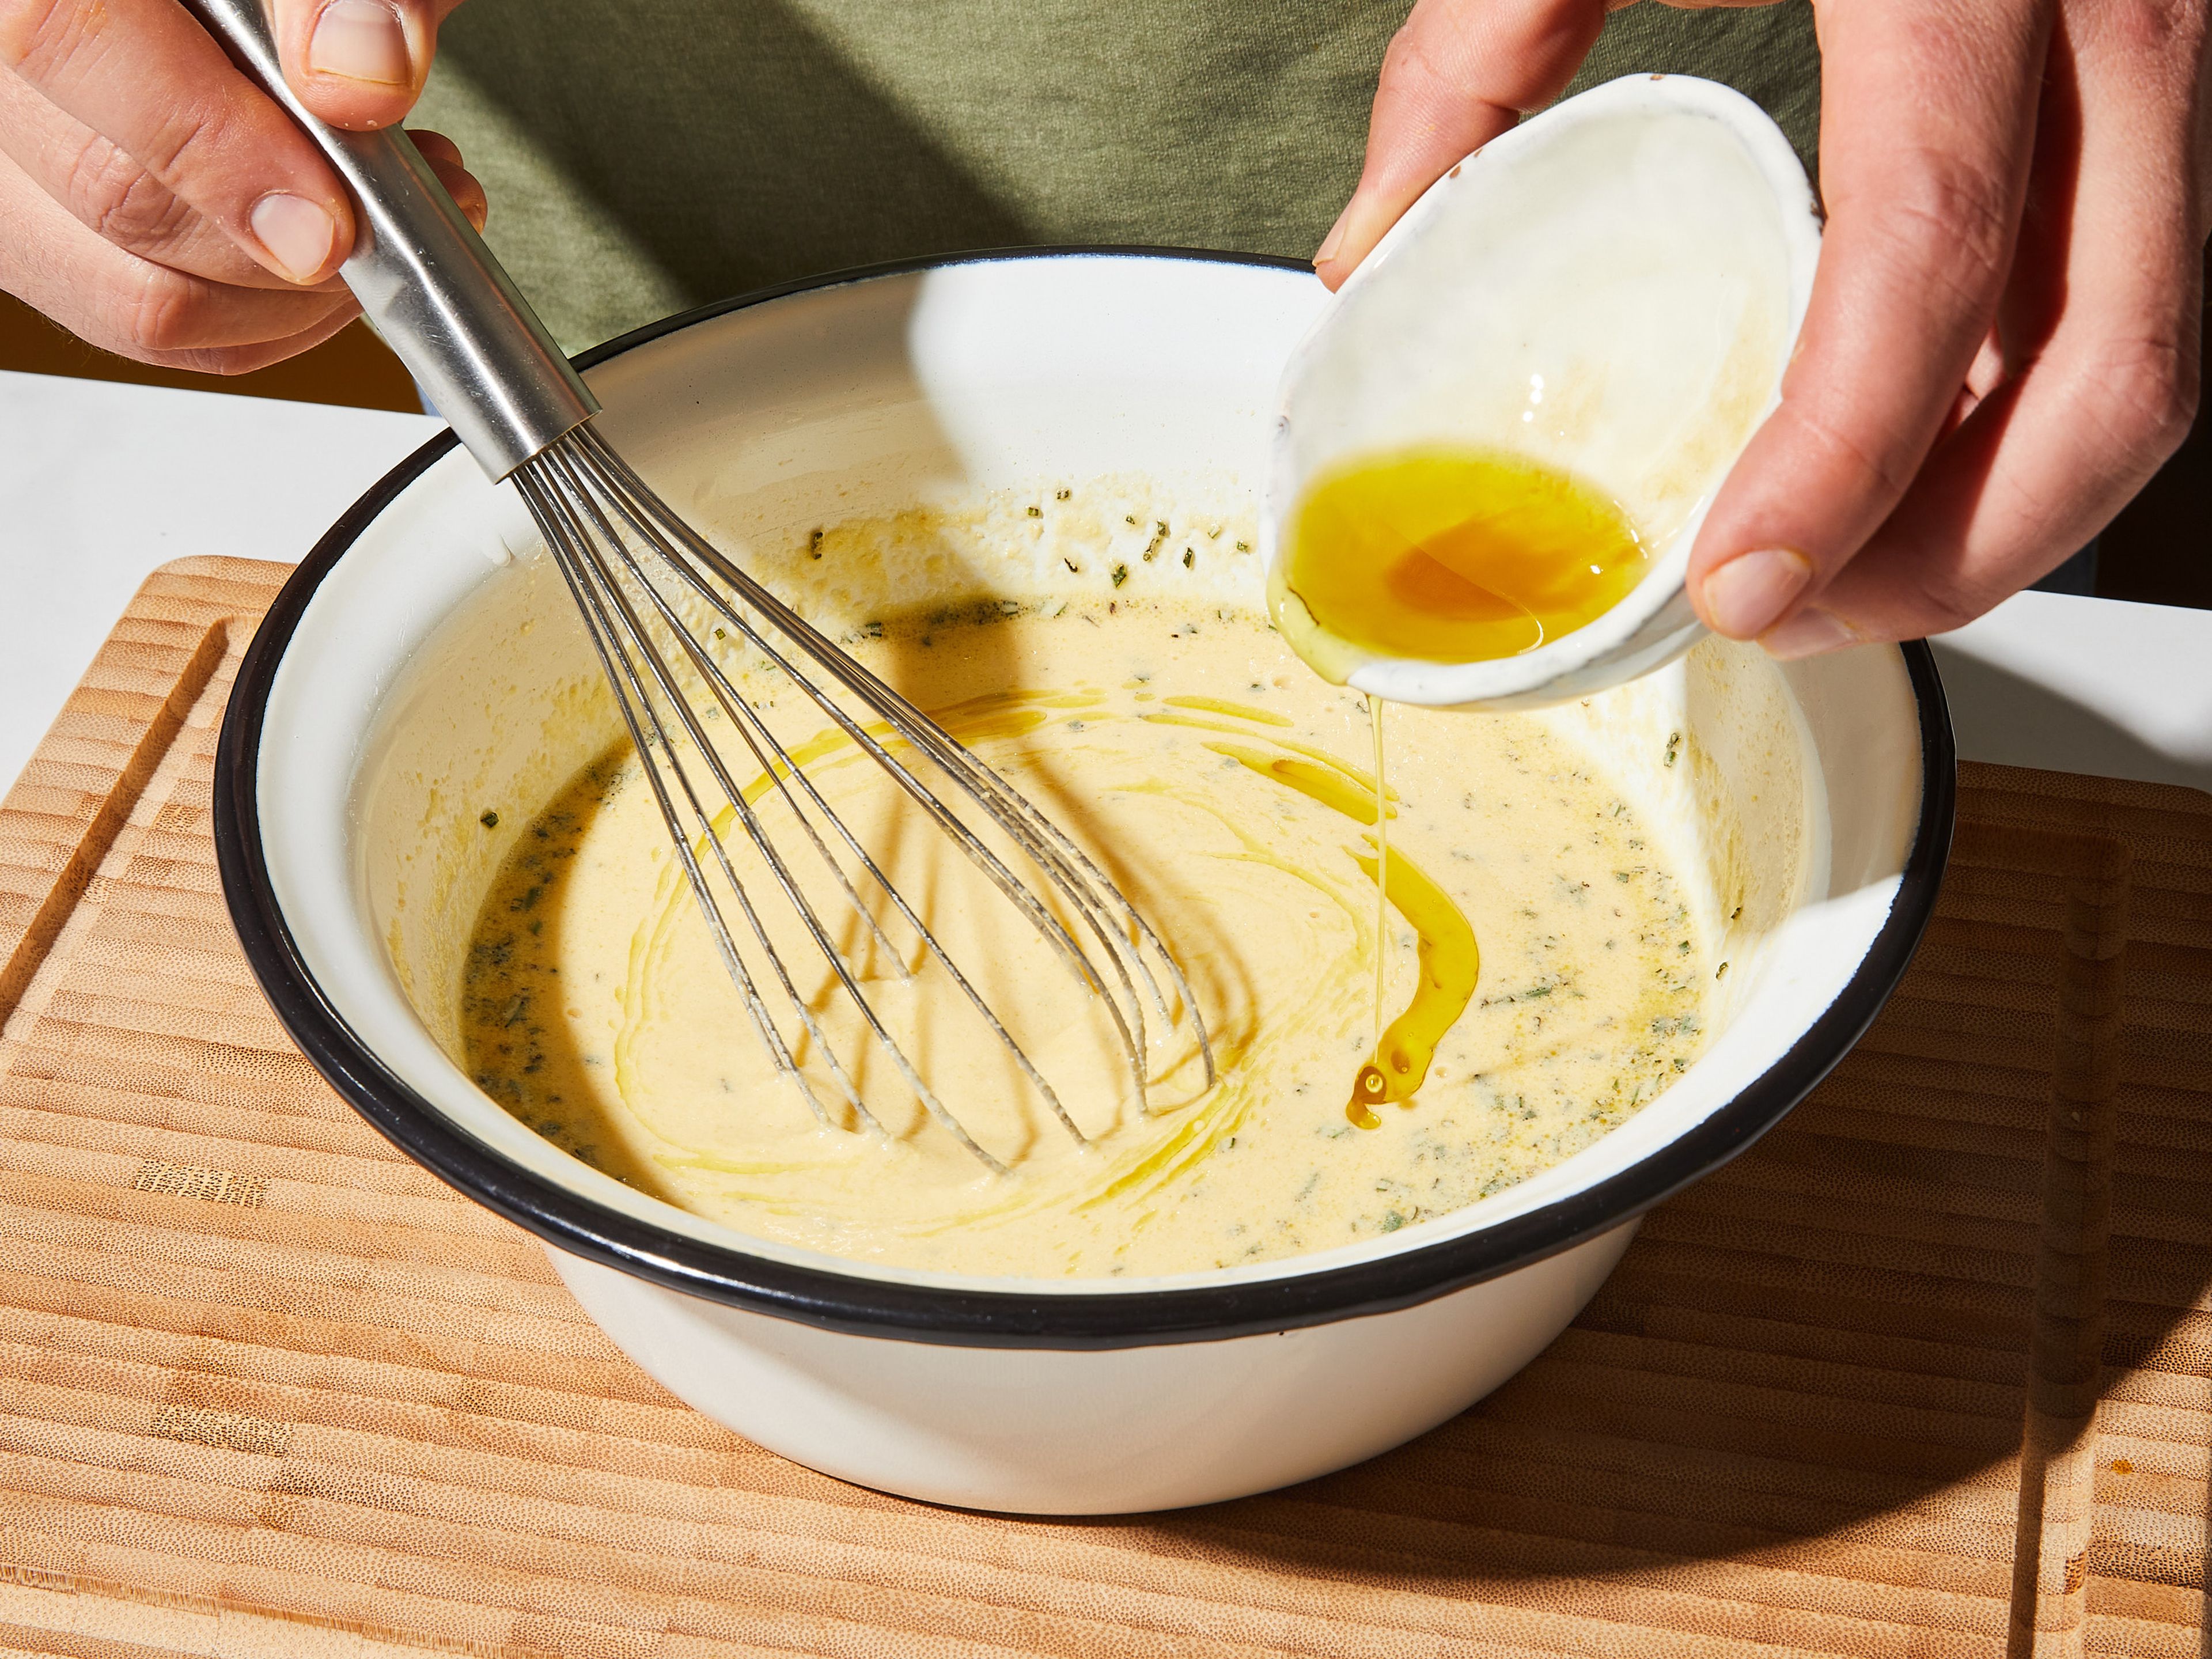 After having rested for 30 min., whisk the batter again and let rest for approx. 30 min. more. During this time, some foam will form on top of the batter. Skim off the foam with a slotted spoon. Add some olive oil and chopped rosemary to the batter and whisk it in until incorporated.